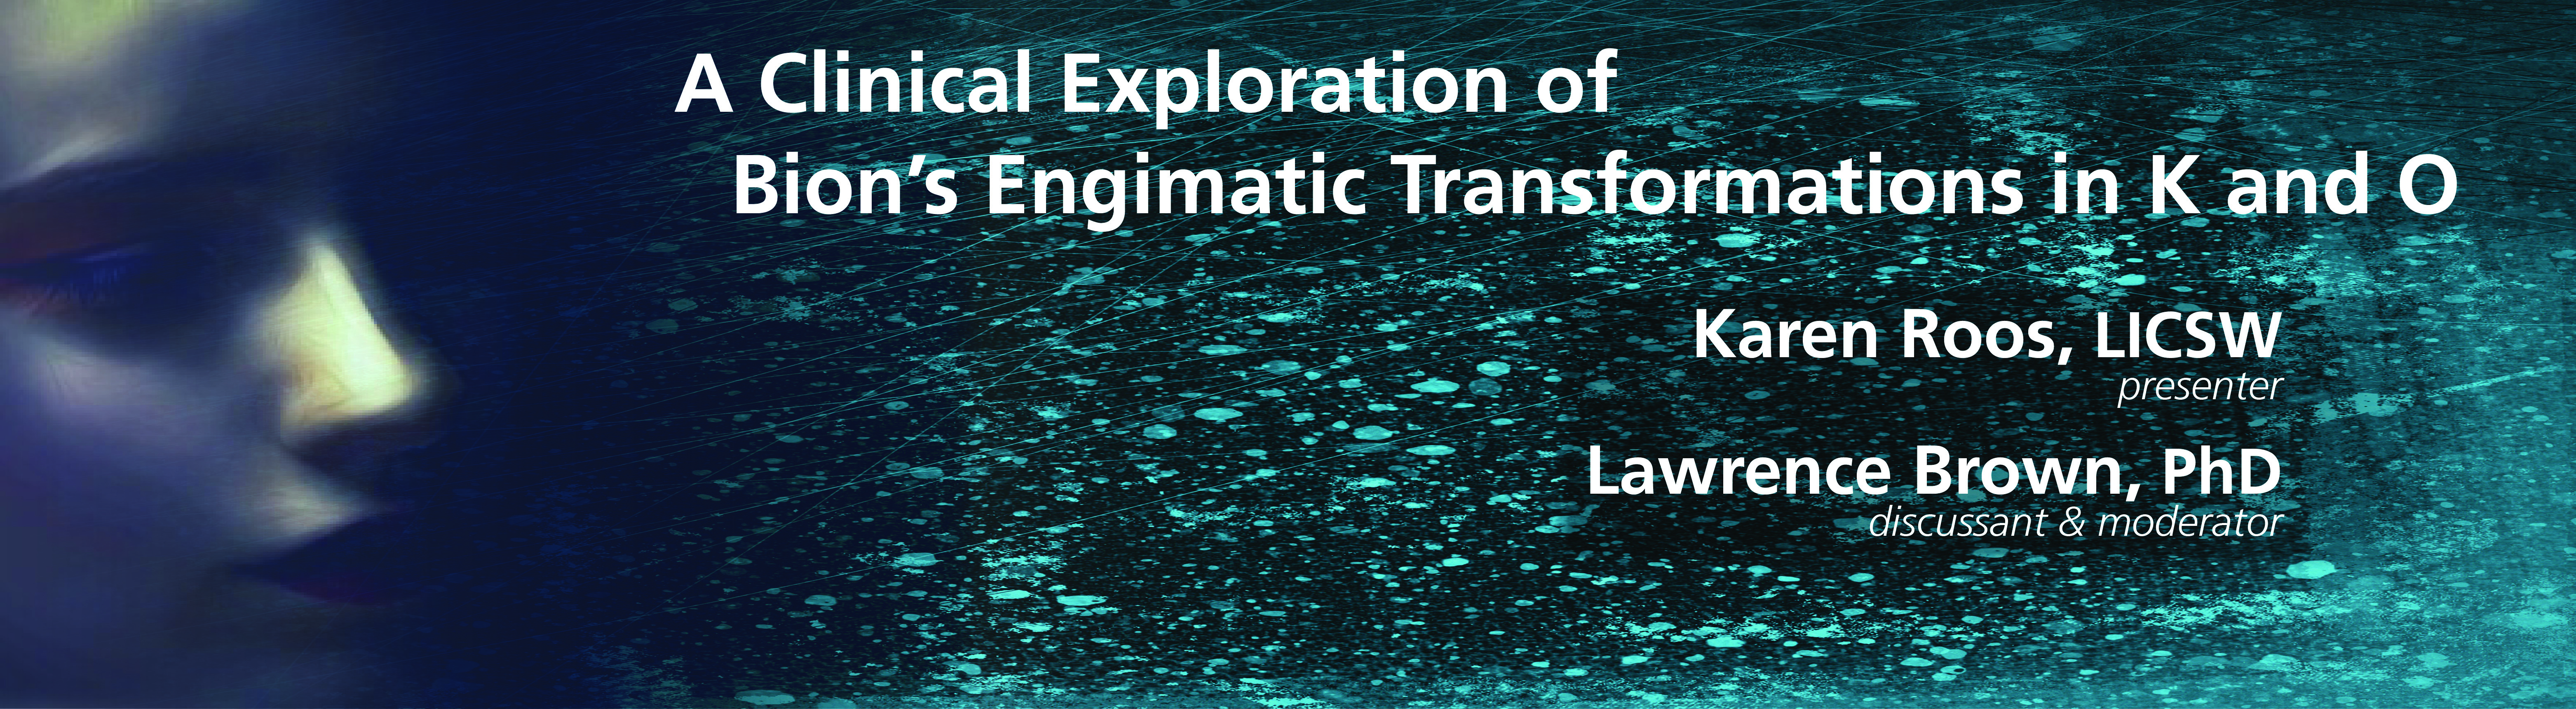 A Clinical Exploration of Bion’s Enigmatic Transformations in K and O with Karen Roos, LICSW